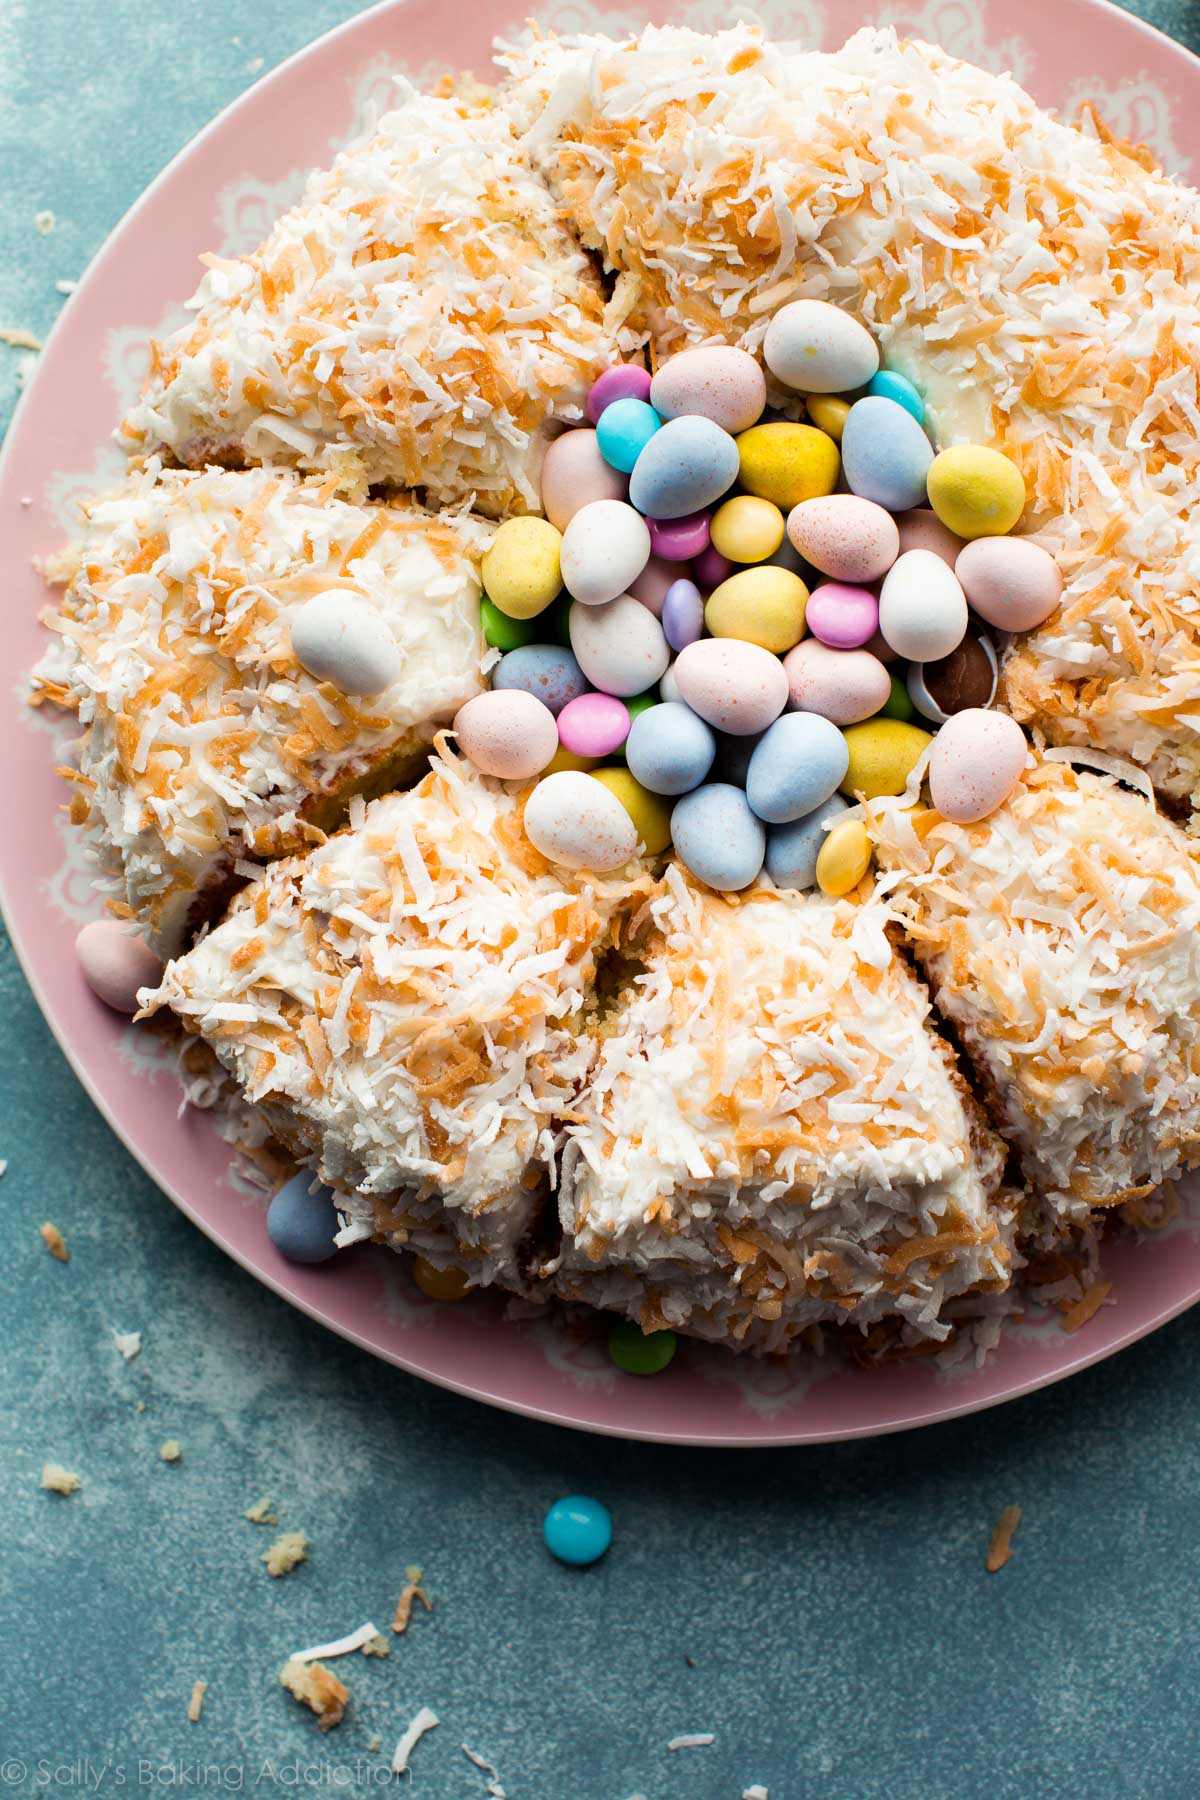 coconut Easter nest cake cut into slices with candy in the center